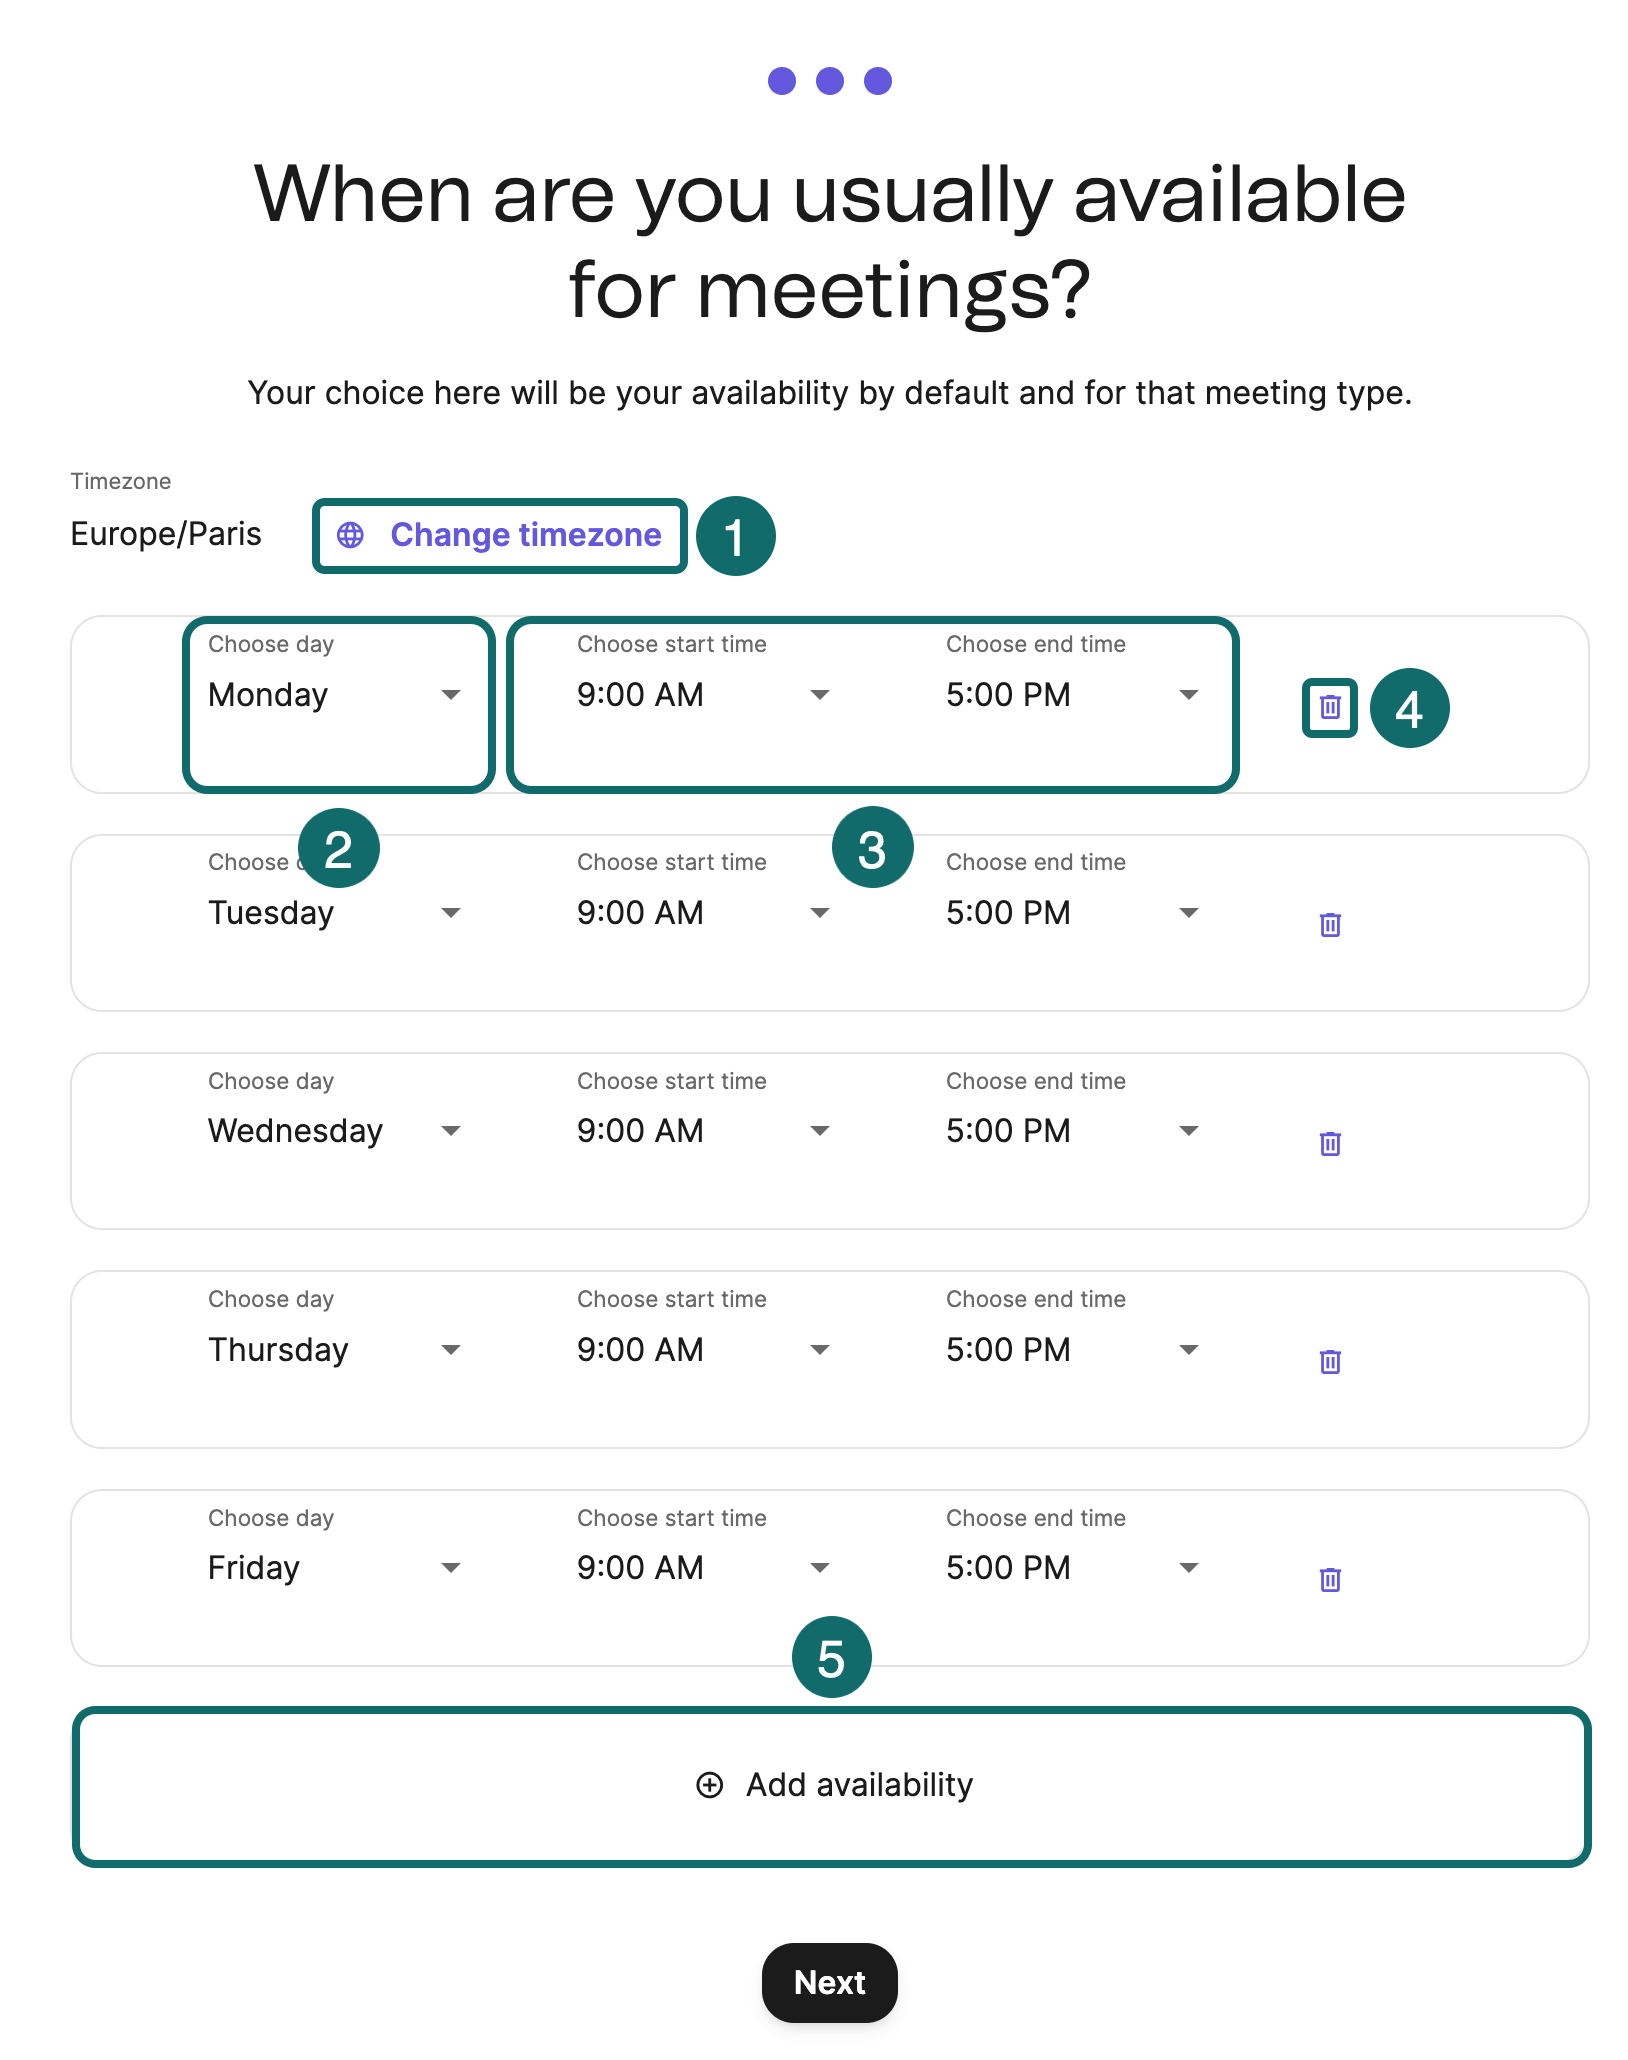 meetings-onboarding-default-availability-US.png